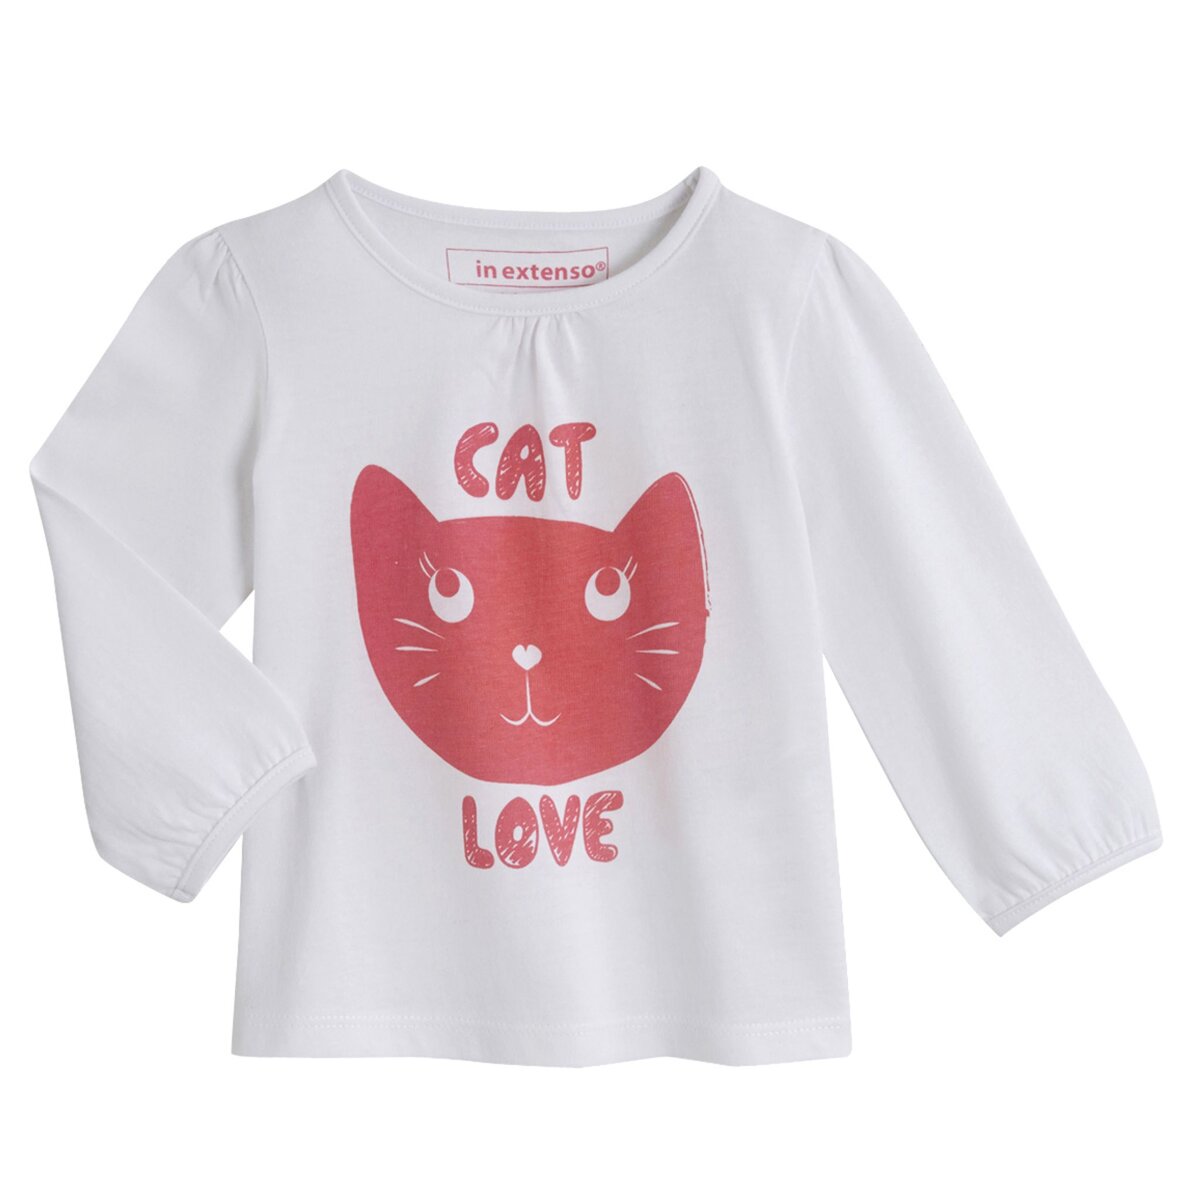 IN EXTENSO Tee-shirt manches longues chat bébé fille